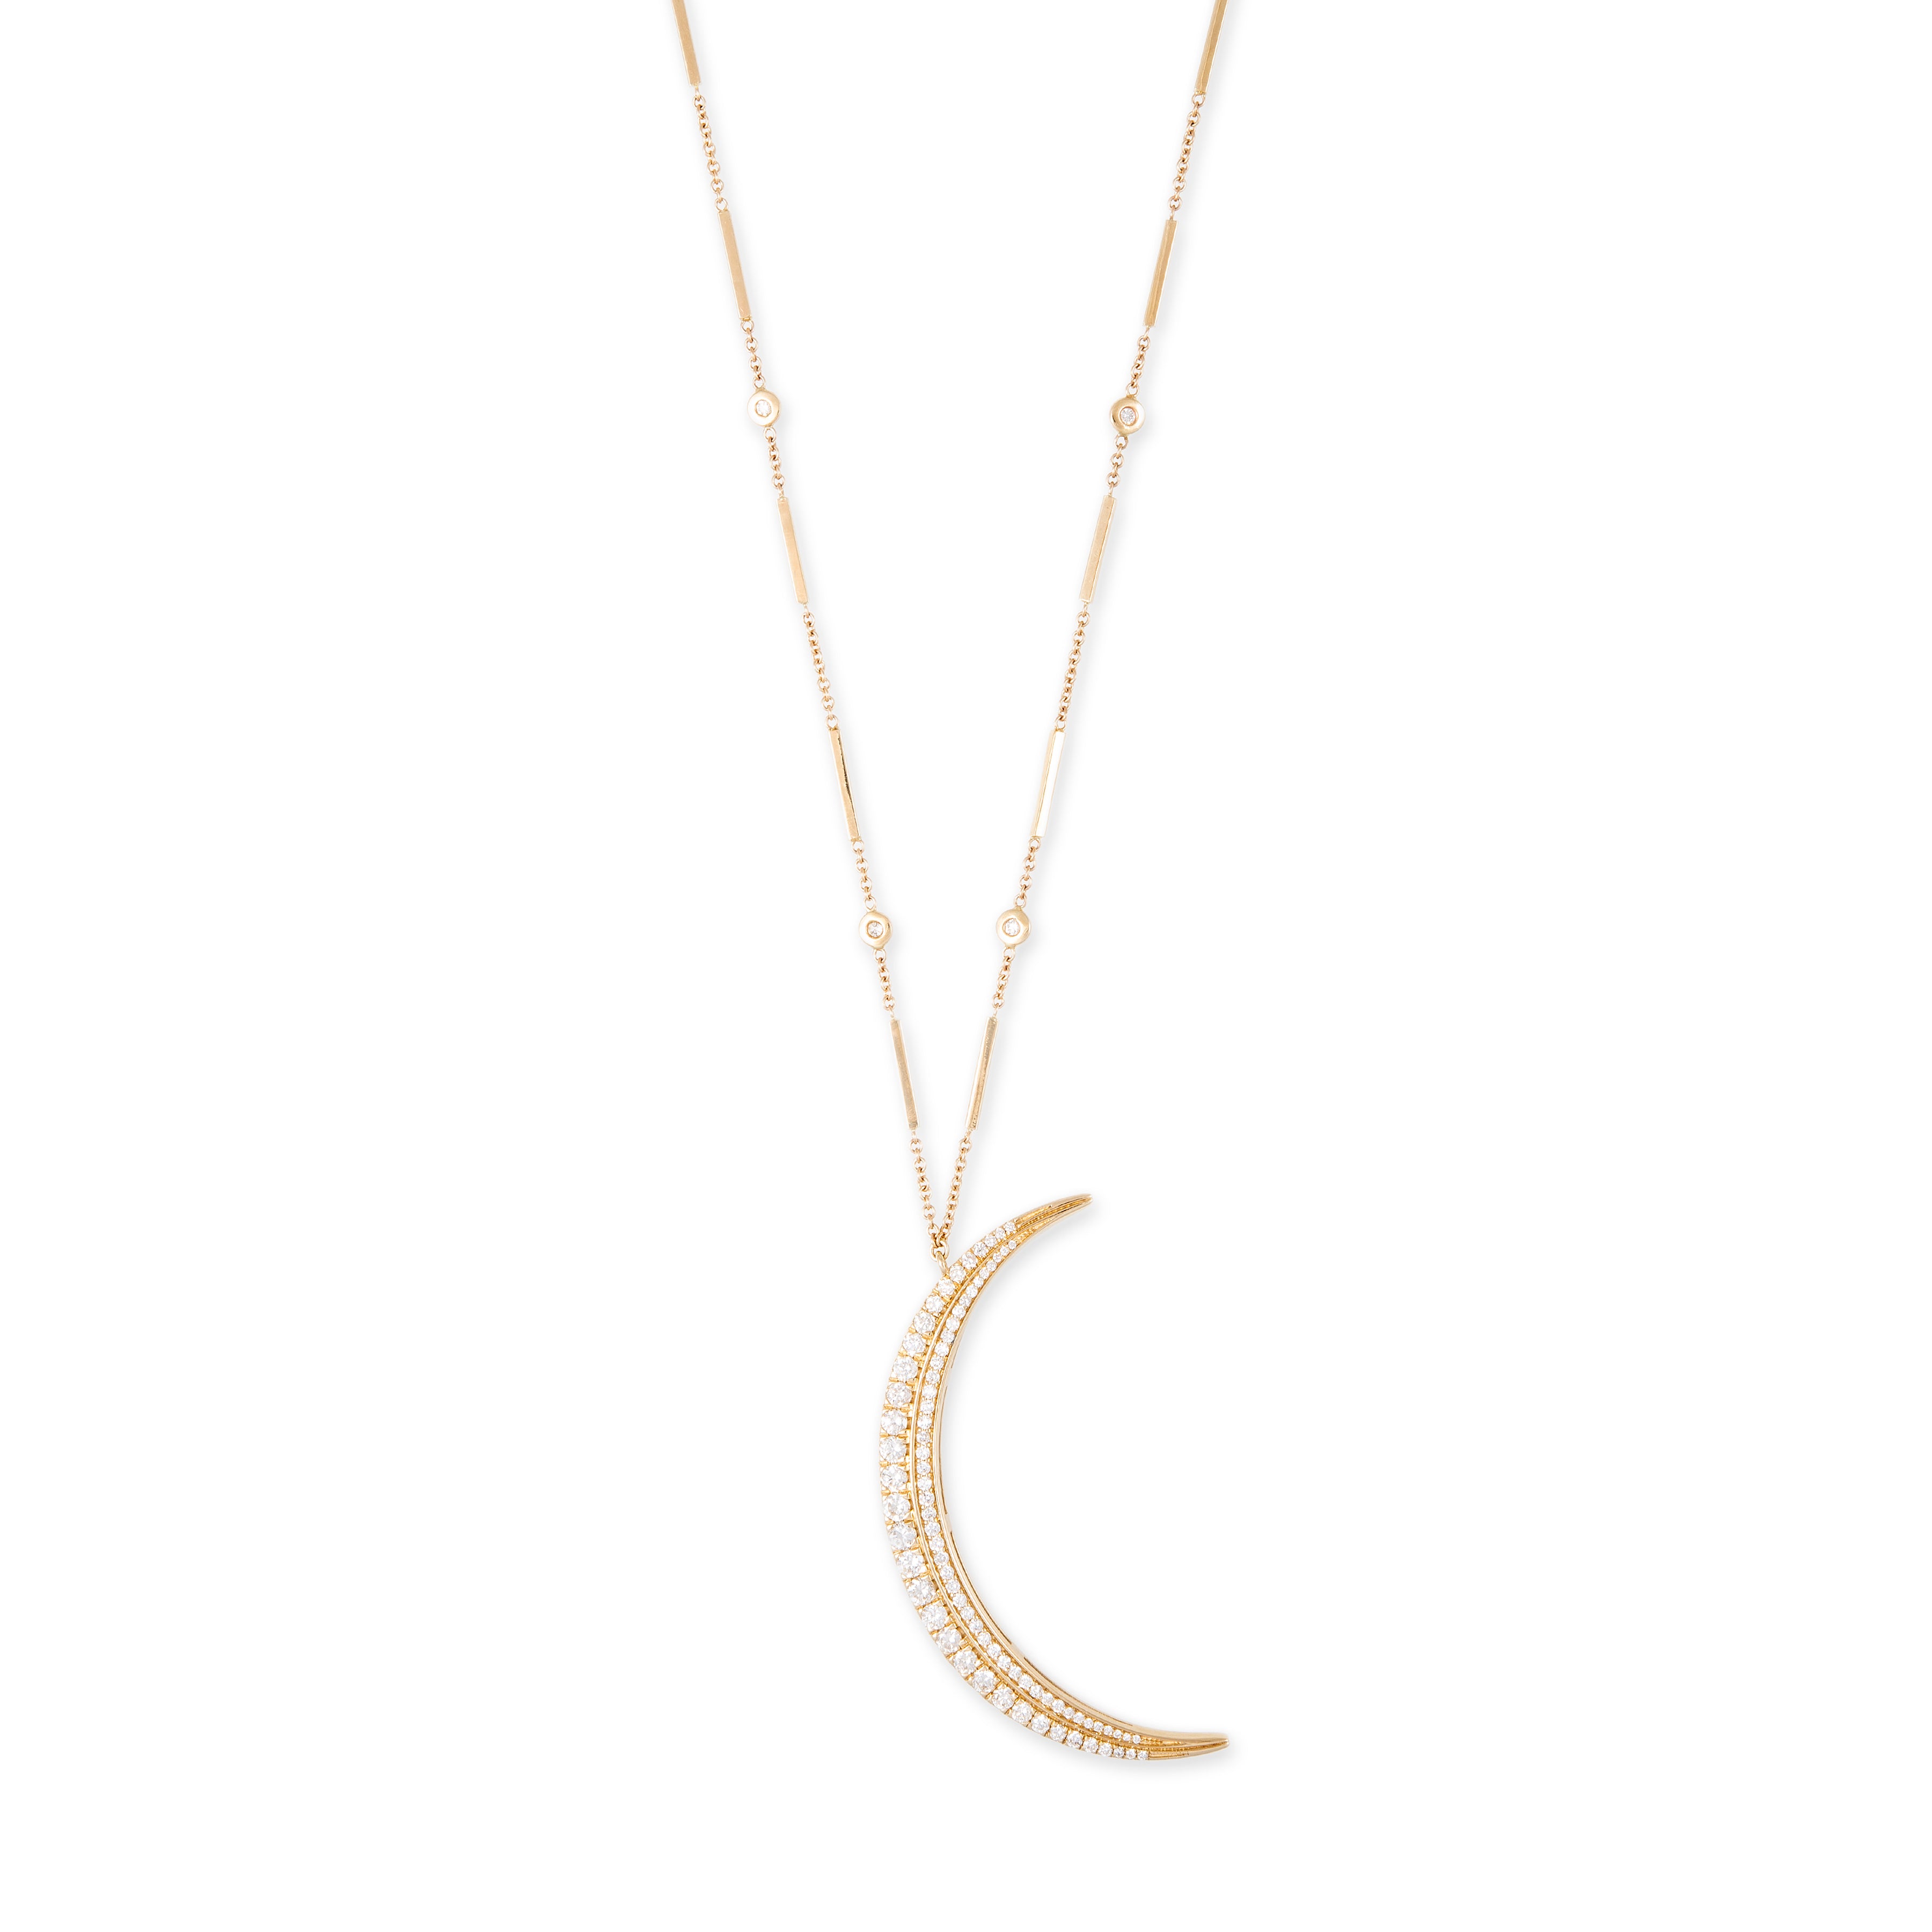 LARGE GRADUATED DIAMOND SLIVER CRESCENT MOON SMOOTH BAR NECKLACE